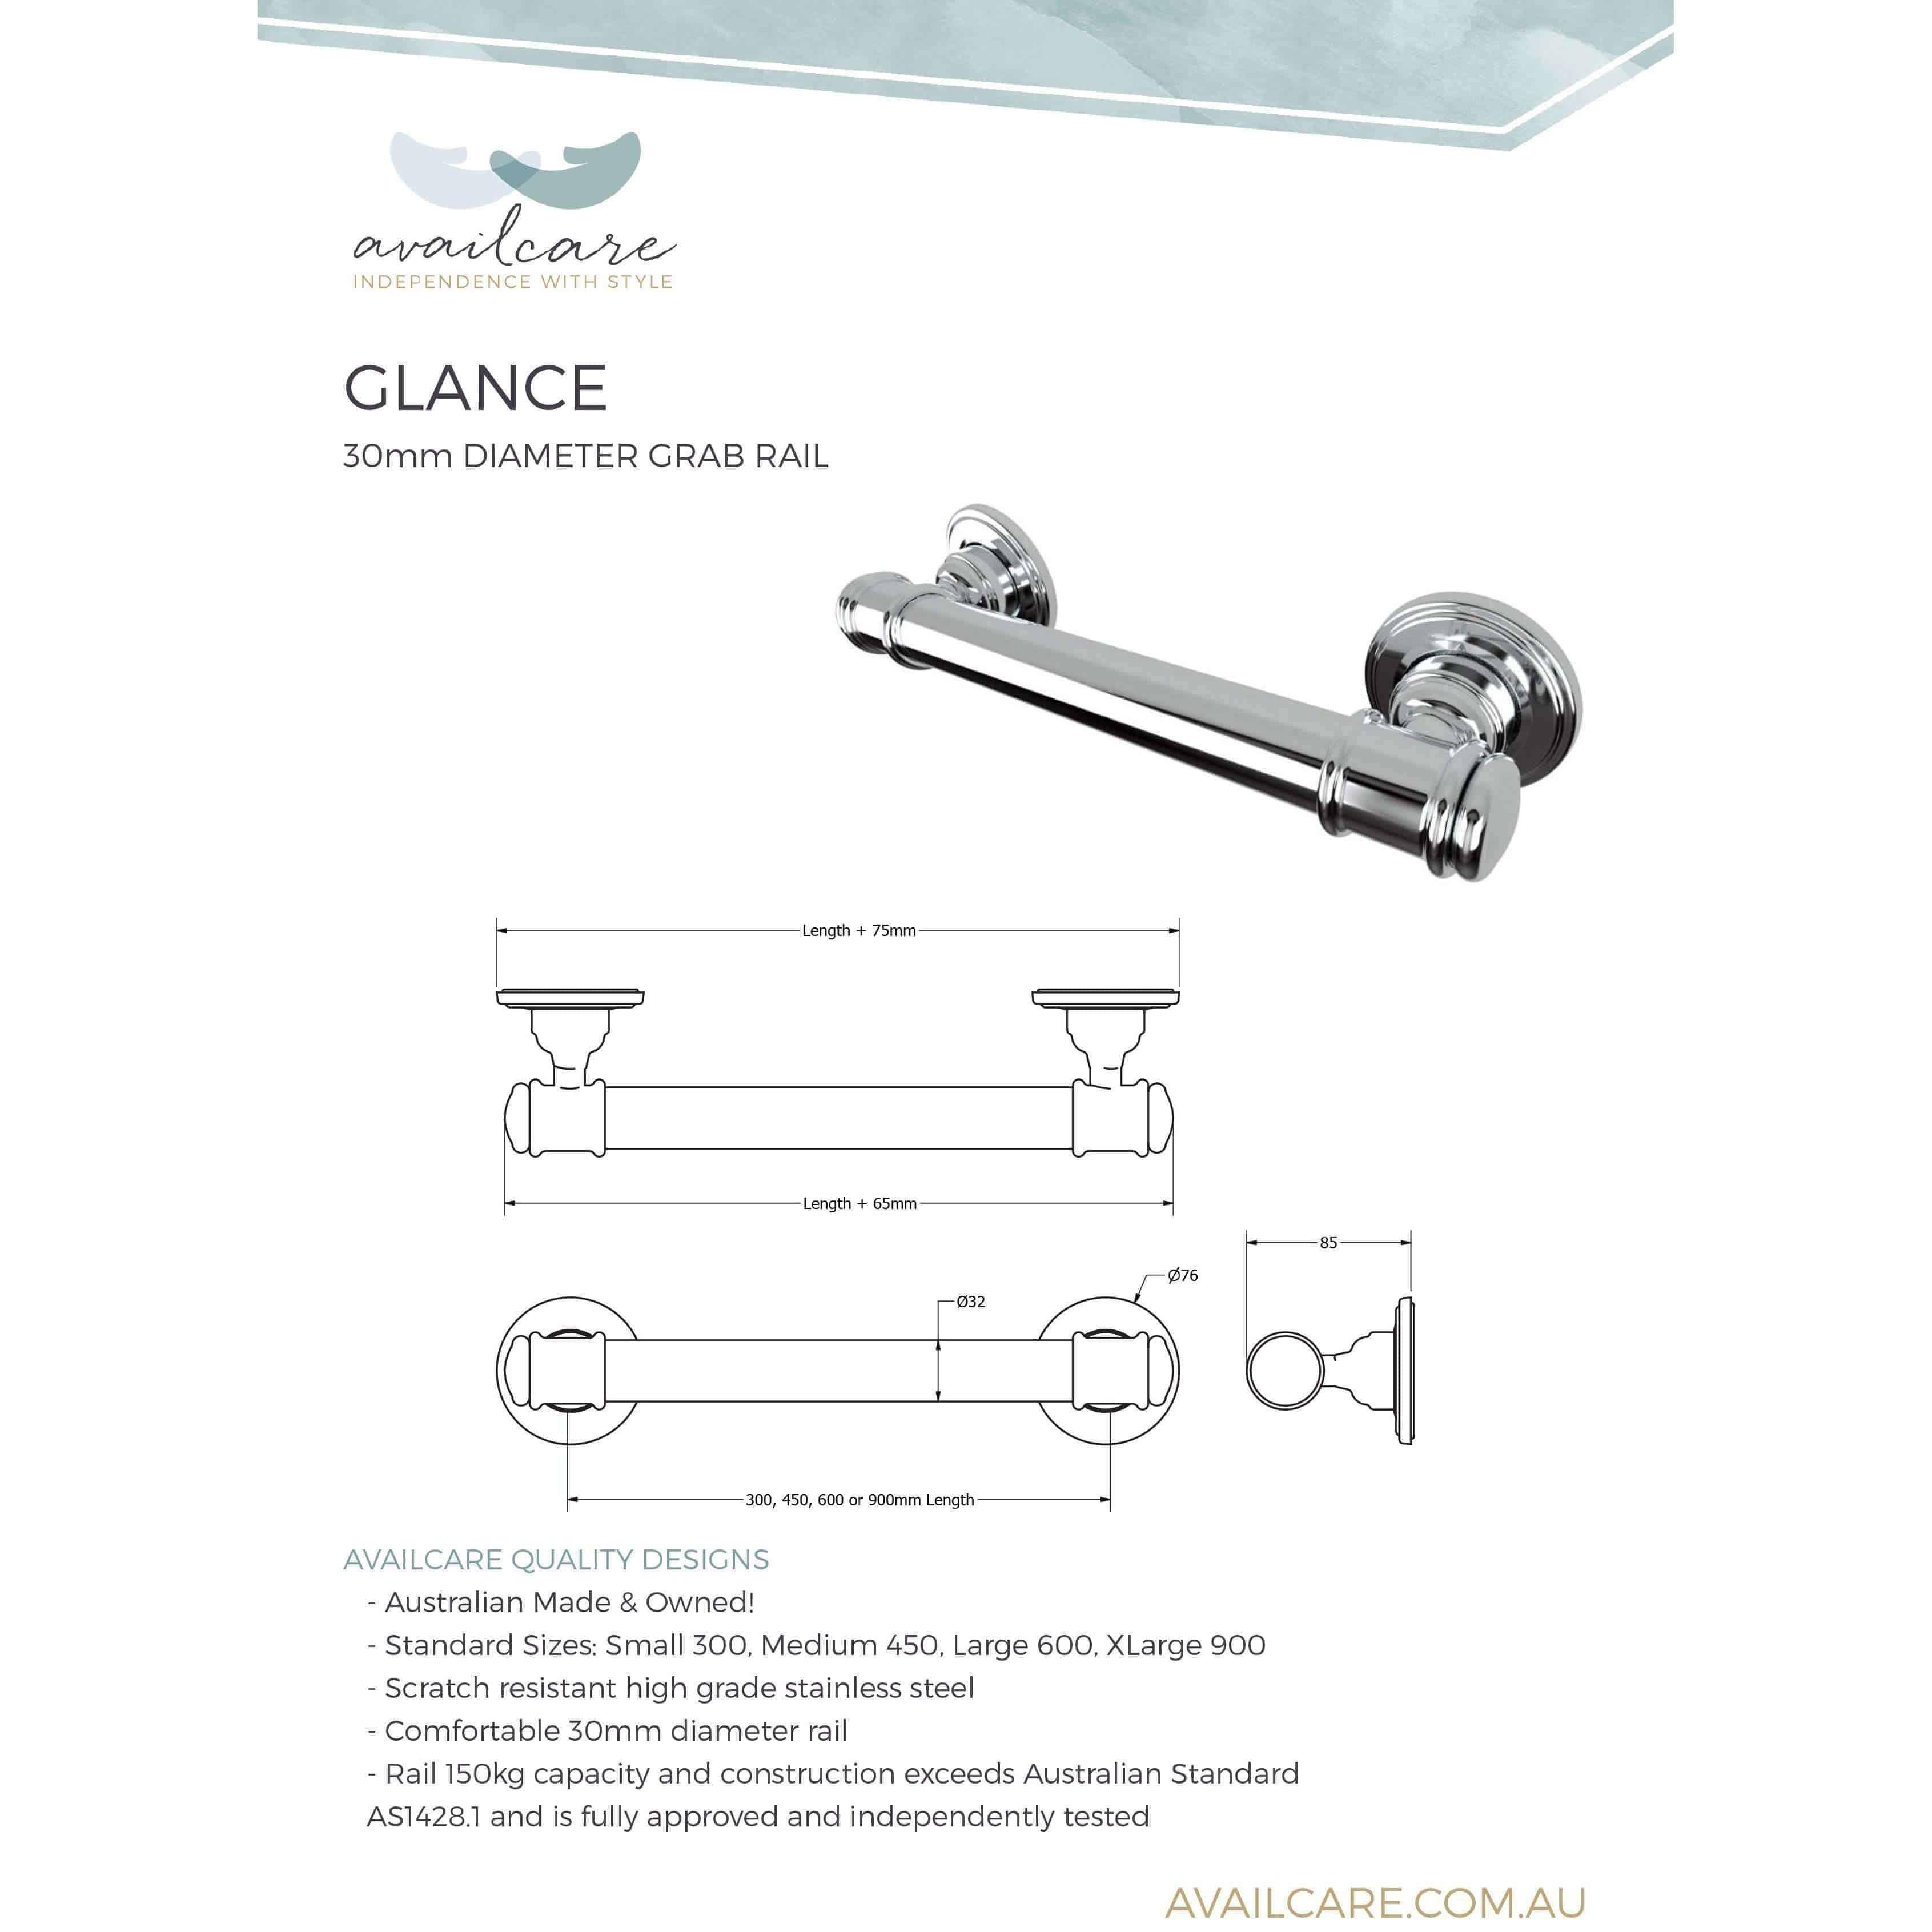 Availcare Glance Rail 600mm Gold - Burdens Plumbing